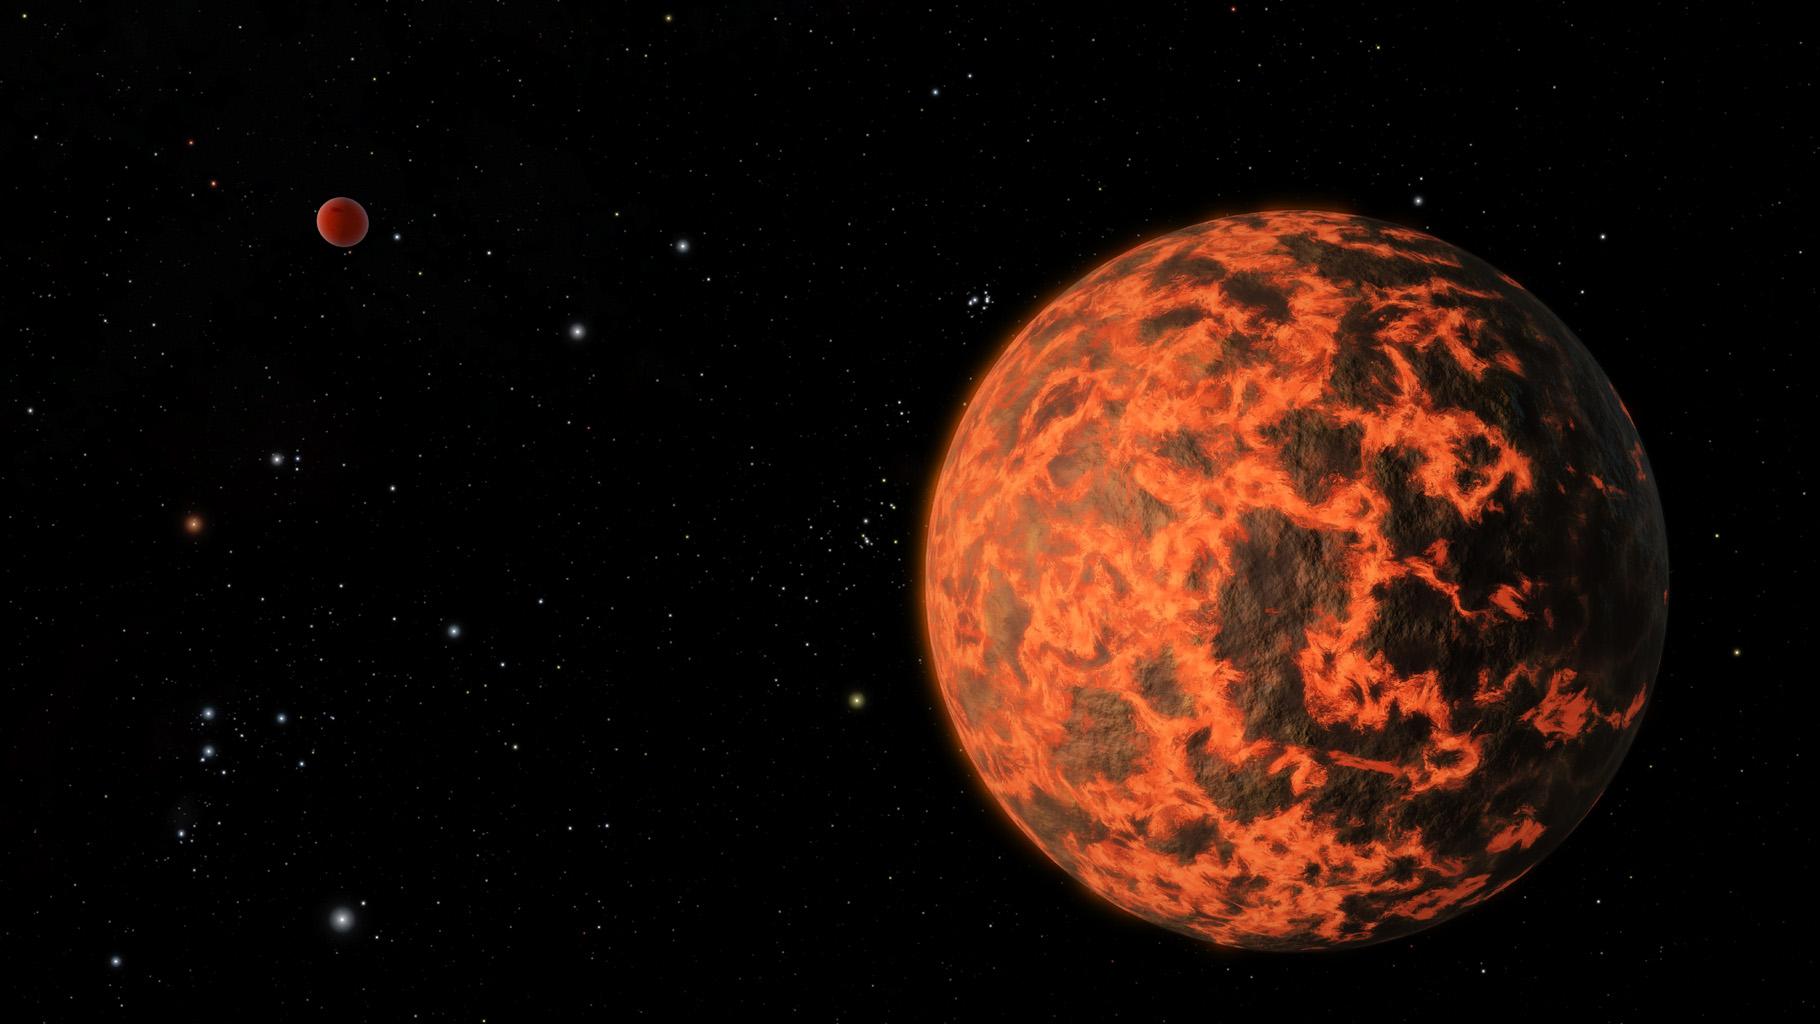 An artist’s impression of early Earth, which was then a molten ball of lava flying through space. NASA/JPL-Caltech, CCBY 4.0